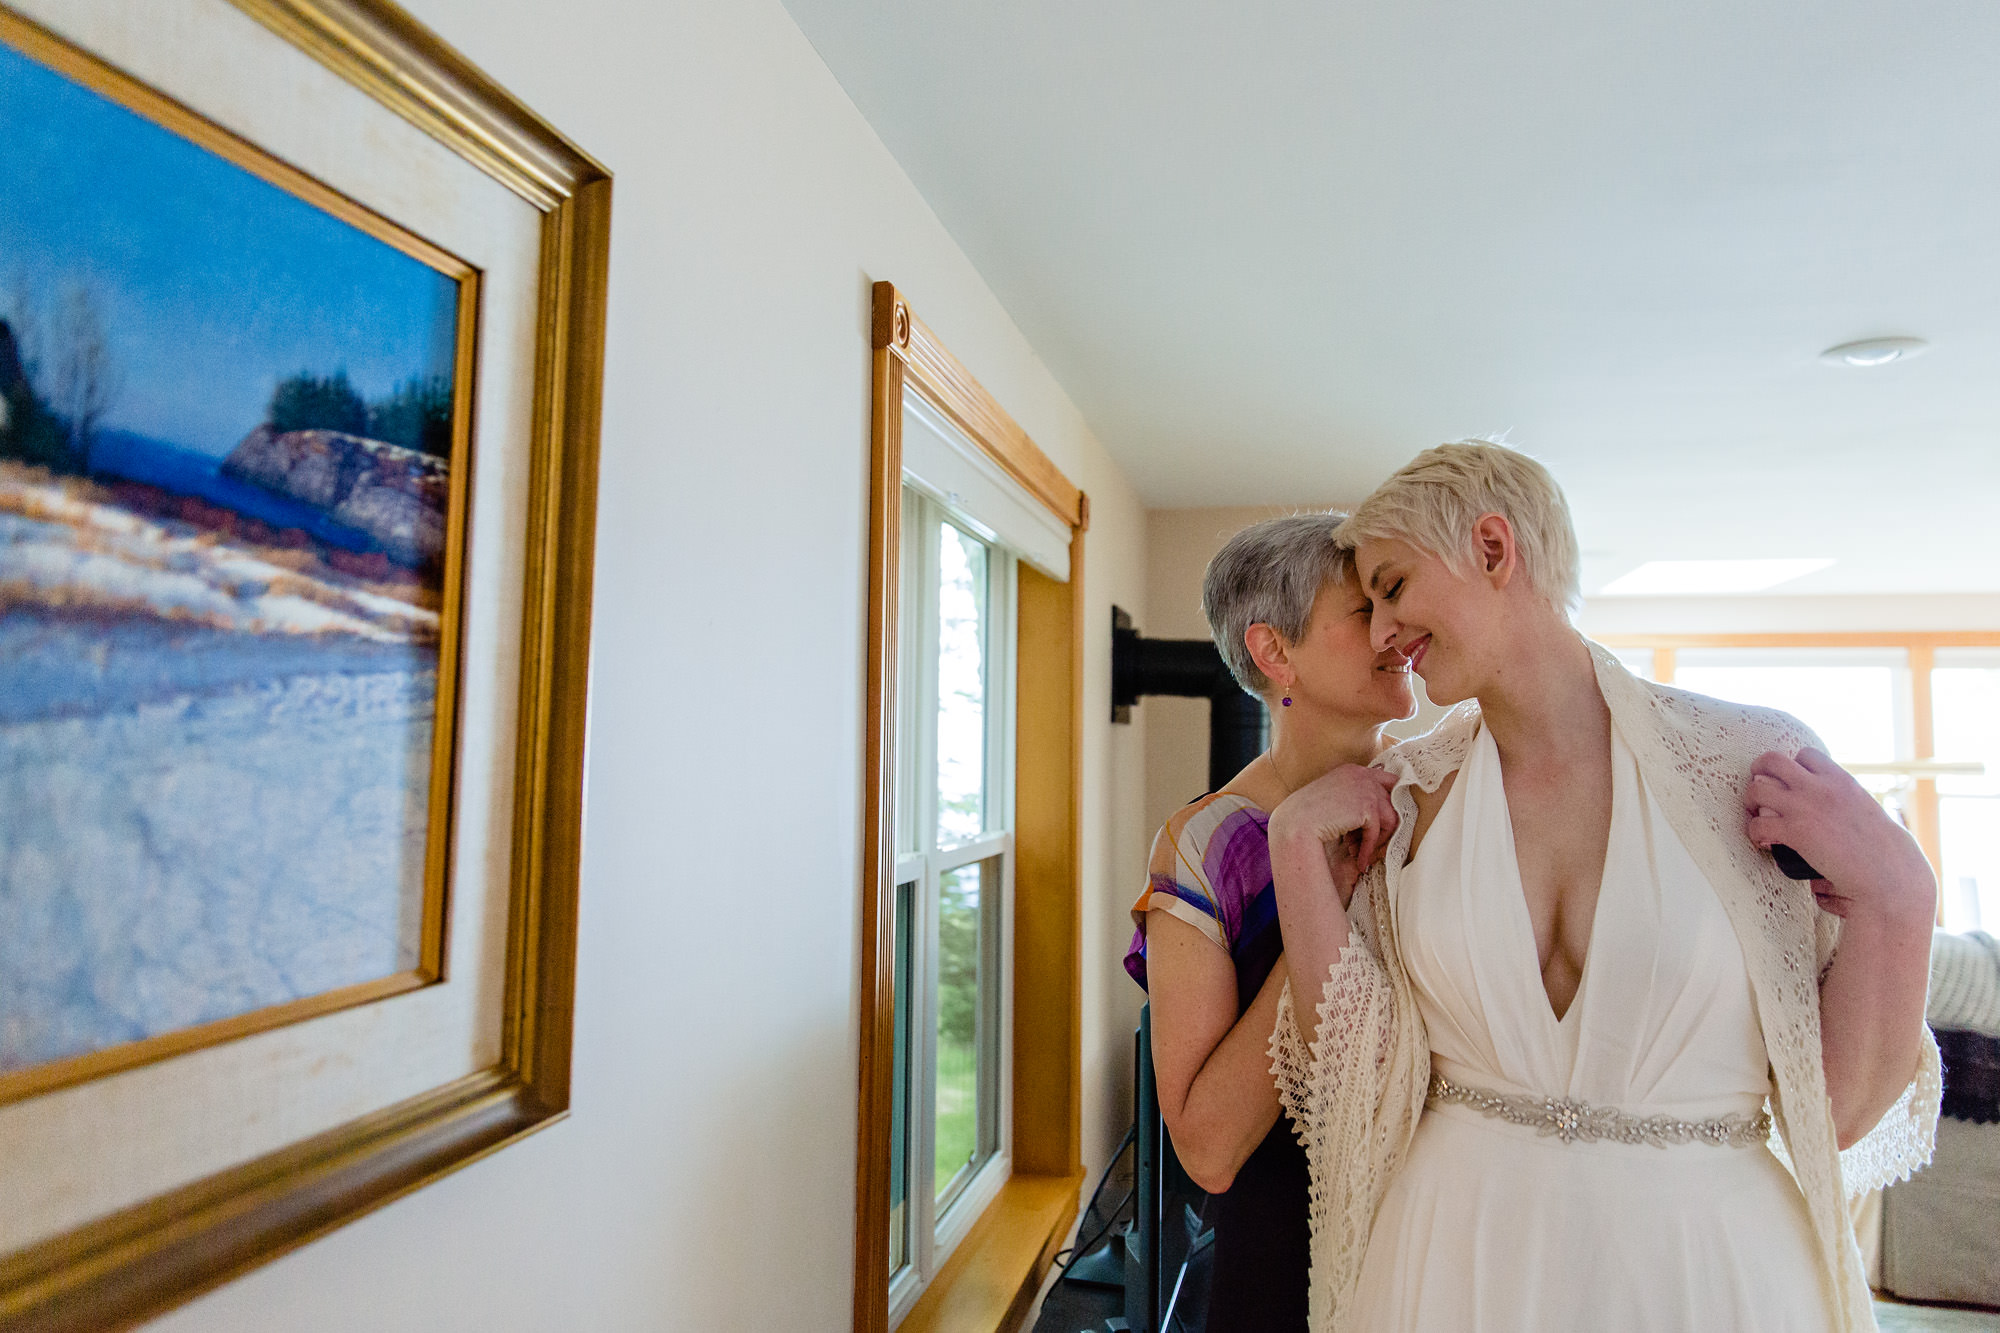 A bride has a quiet moment with her mom at her wedding in Maine